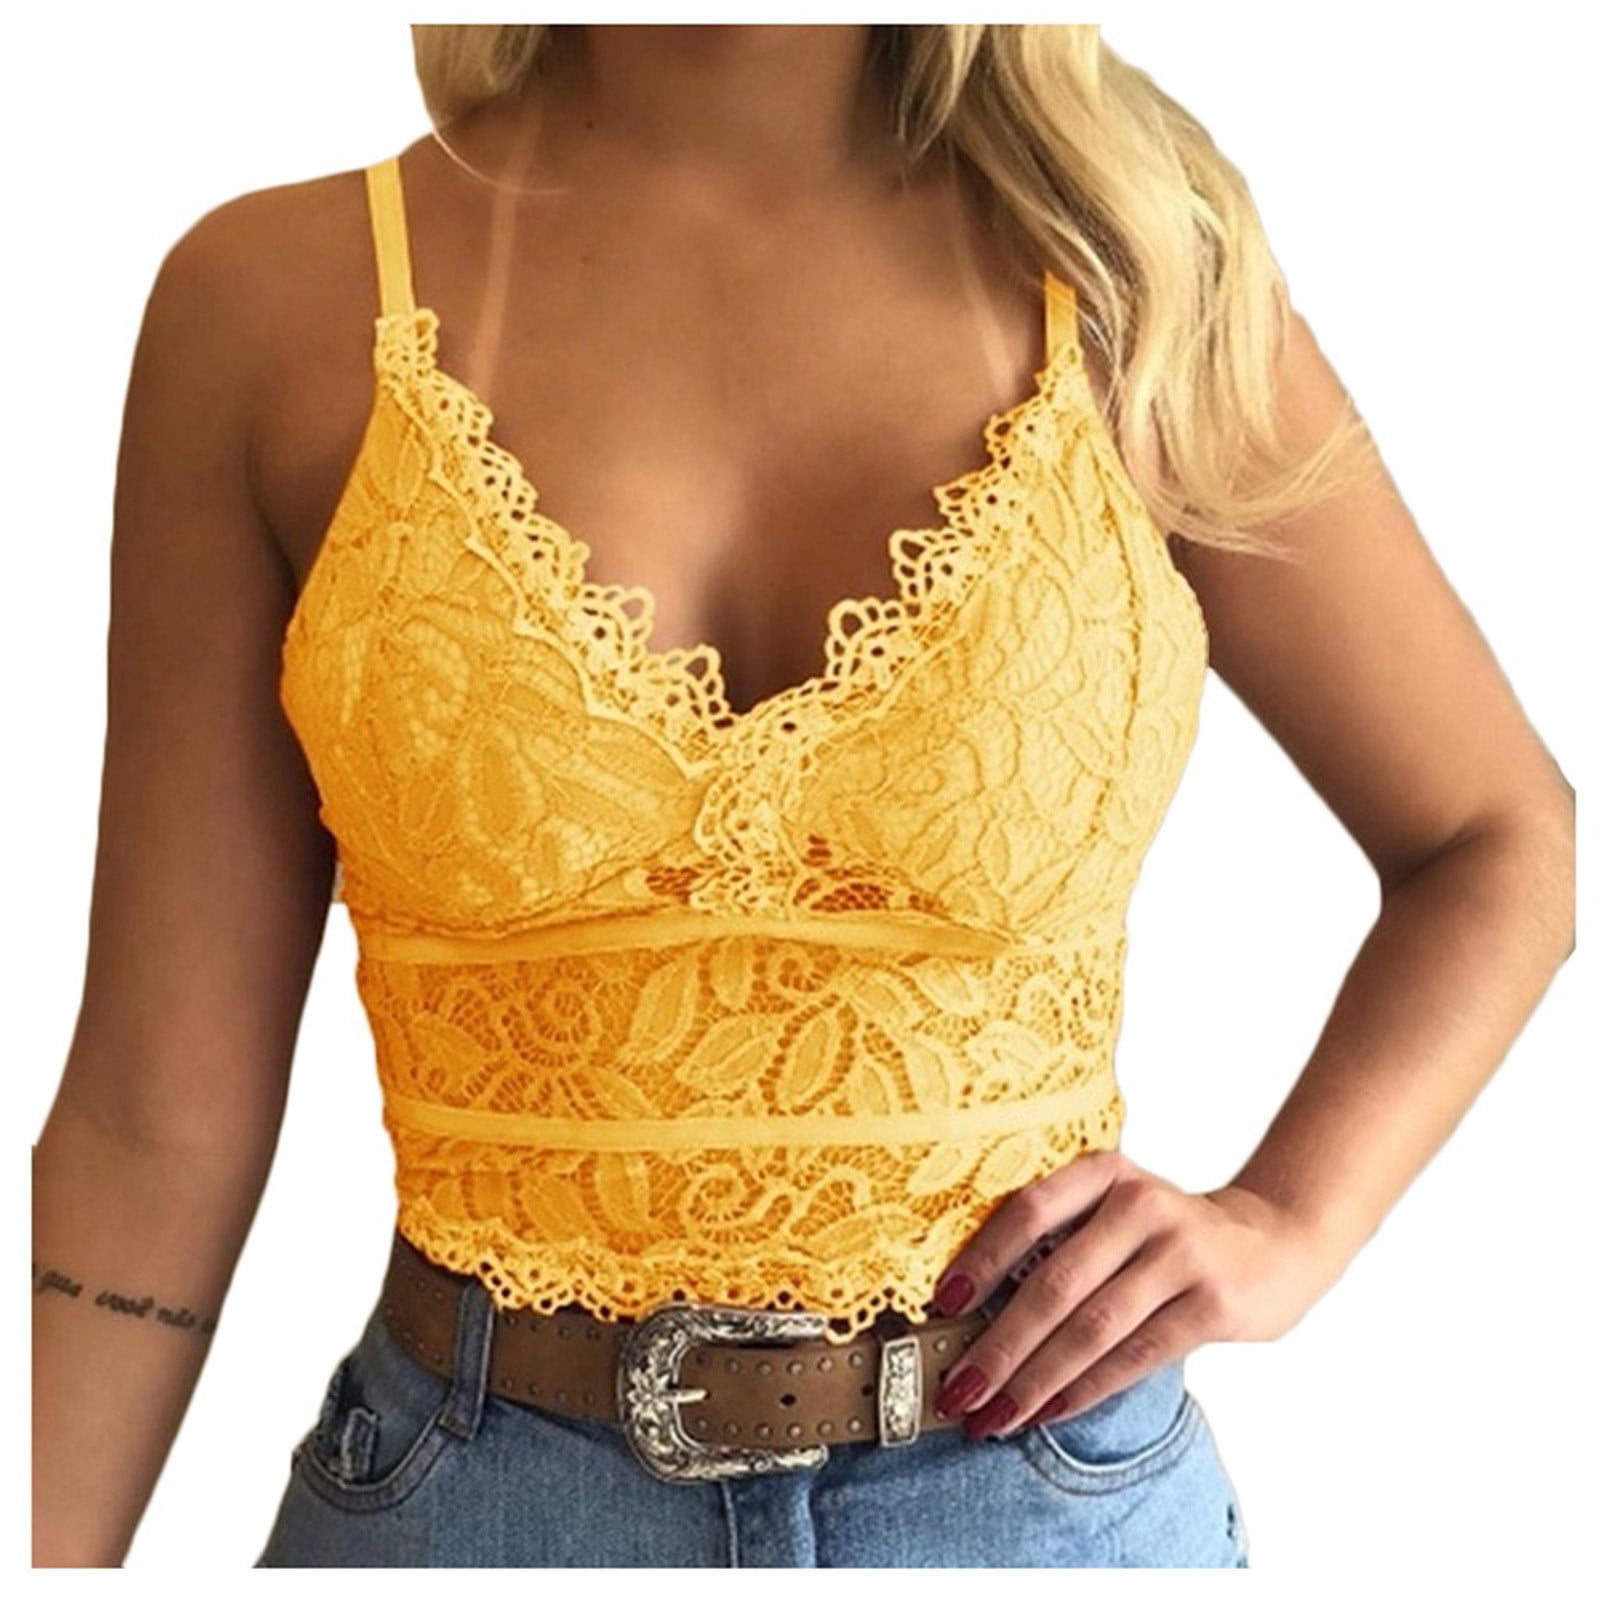 Women Lace Bra Crop Top Summer Bralette Spaghetti Strap Camisoles Push up  Bra Tank Top Backless Cami Bustier Tops